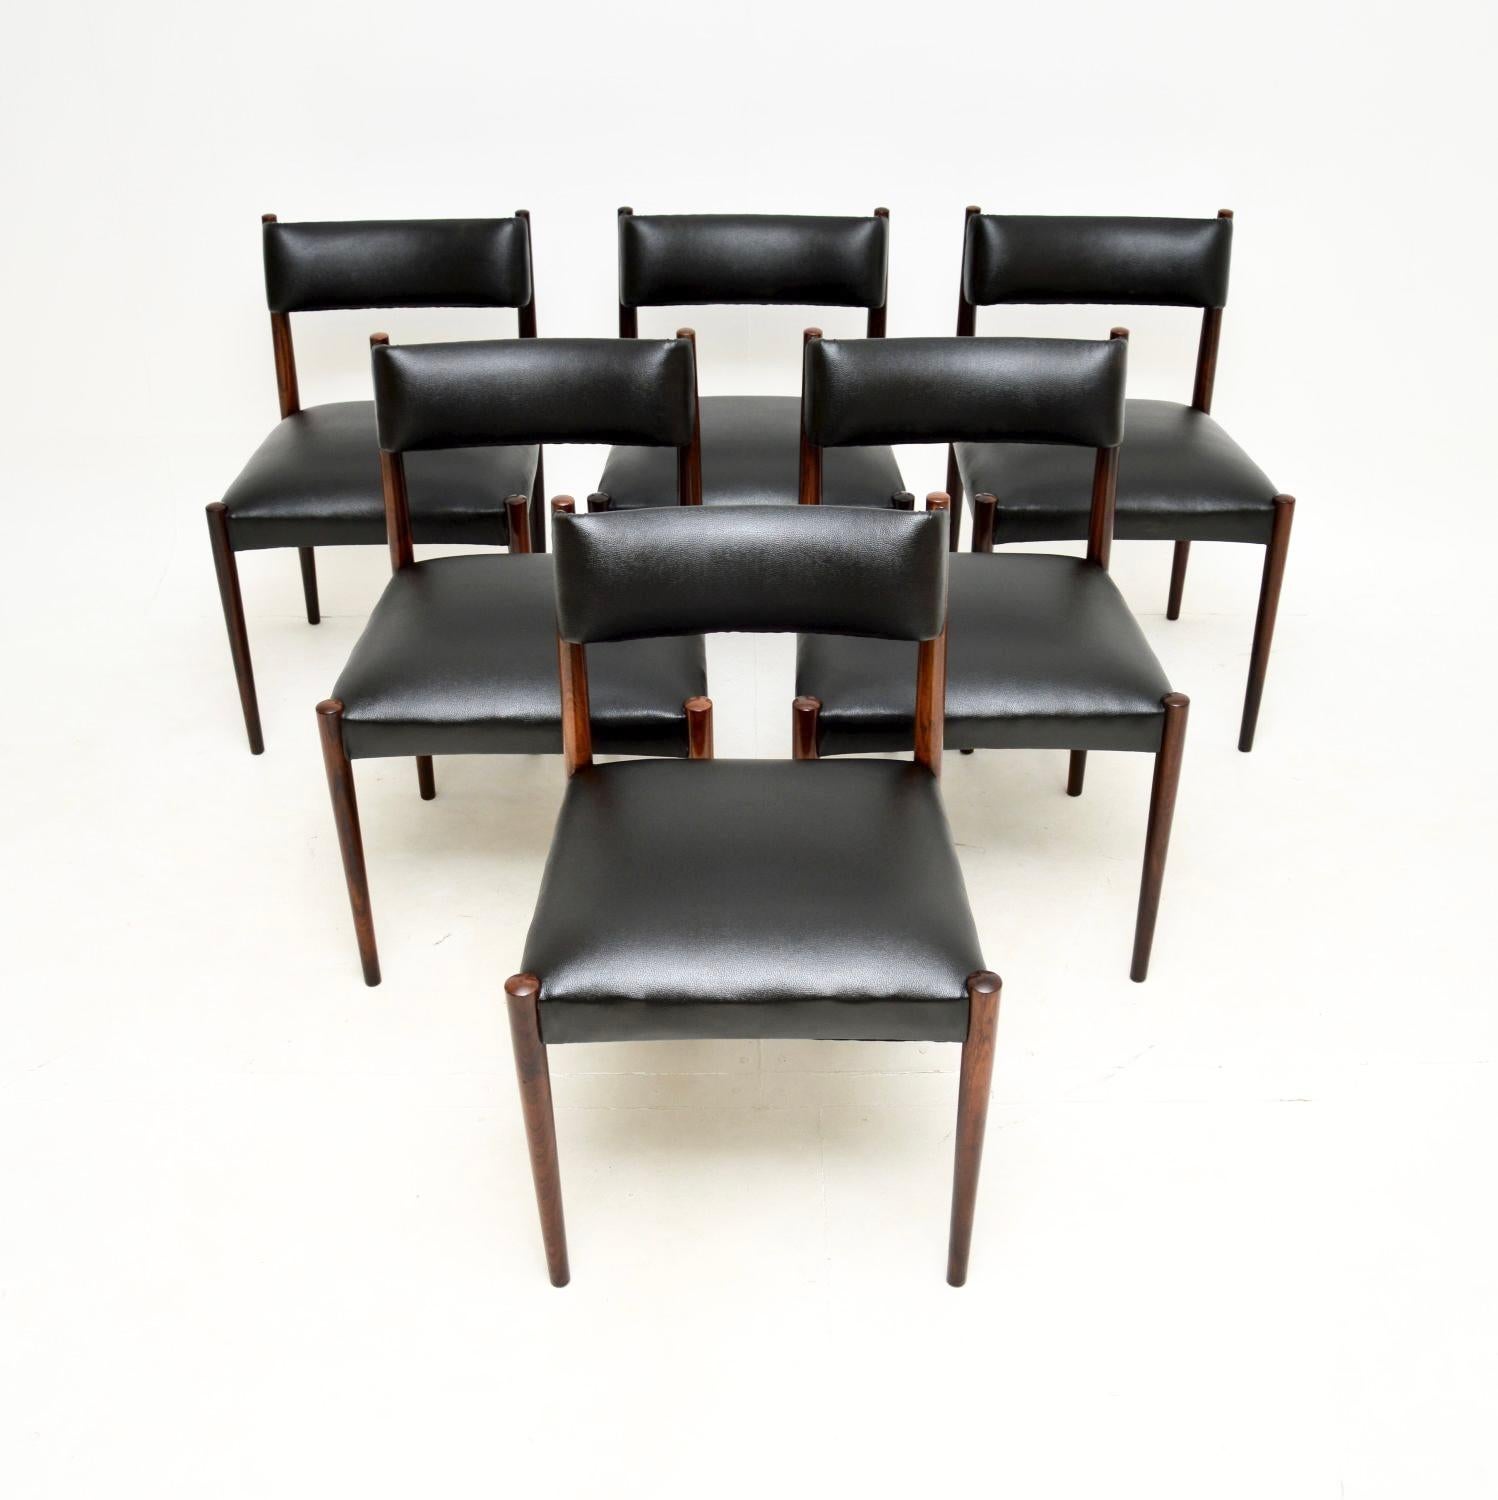 A stunning set of six vintage dining chairs by Robert Heritage for Archie Shine. They are the ‘Bridgford’ model, made in England in the 1960’s.

They are of superb quality, very comfortable and stylish, they look amazing from all angles.

The frames